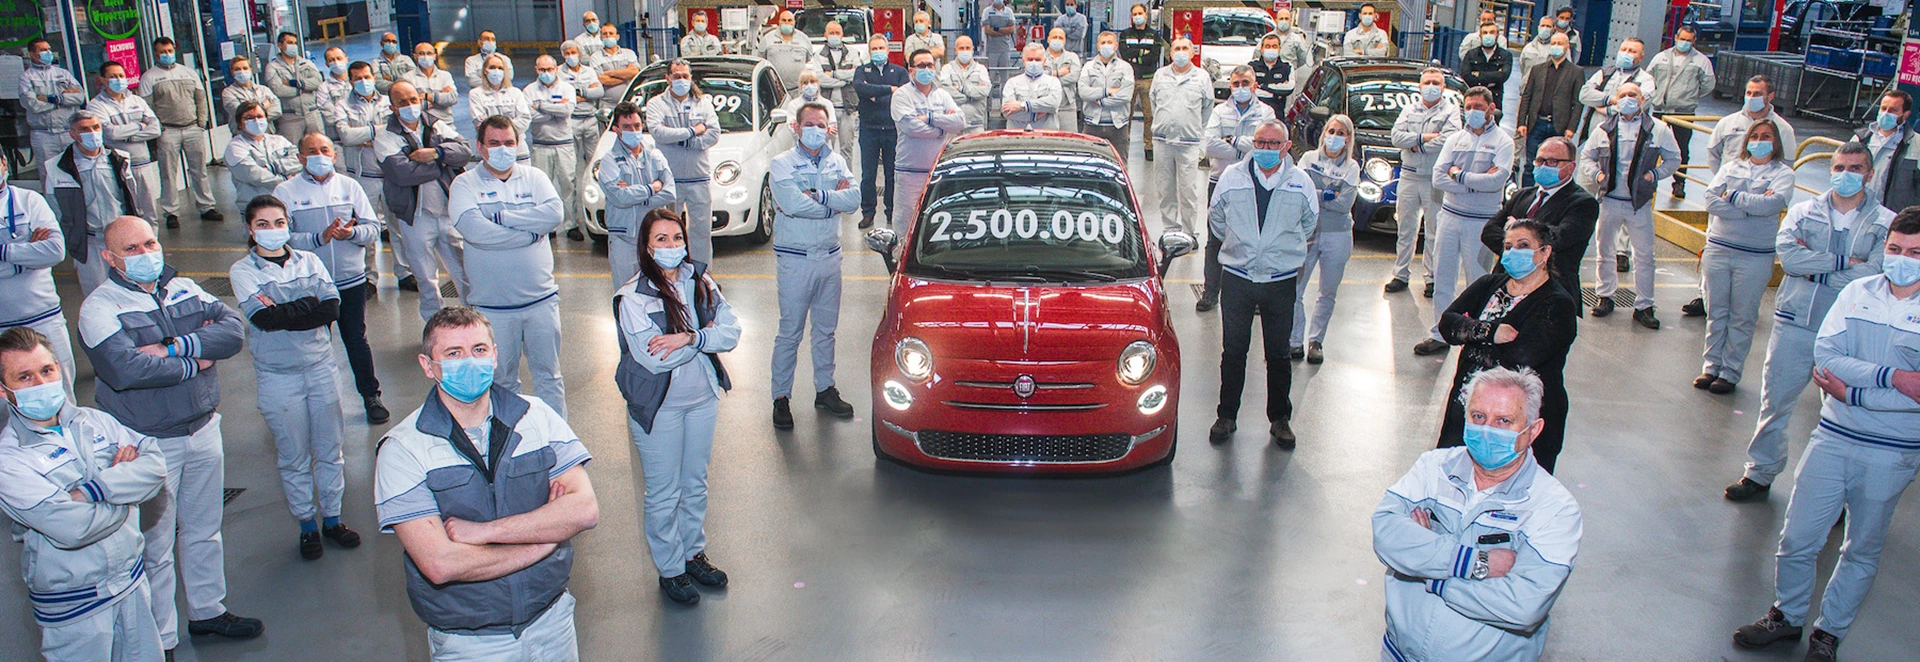 Fiat hits 2.5 million production milestone for 500 model at Poland factory 